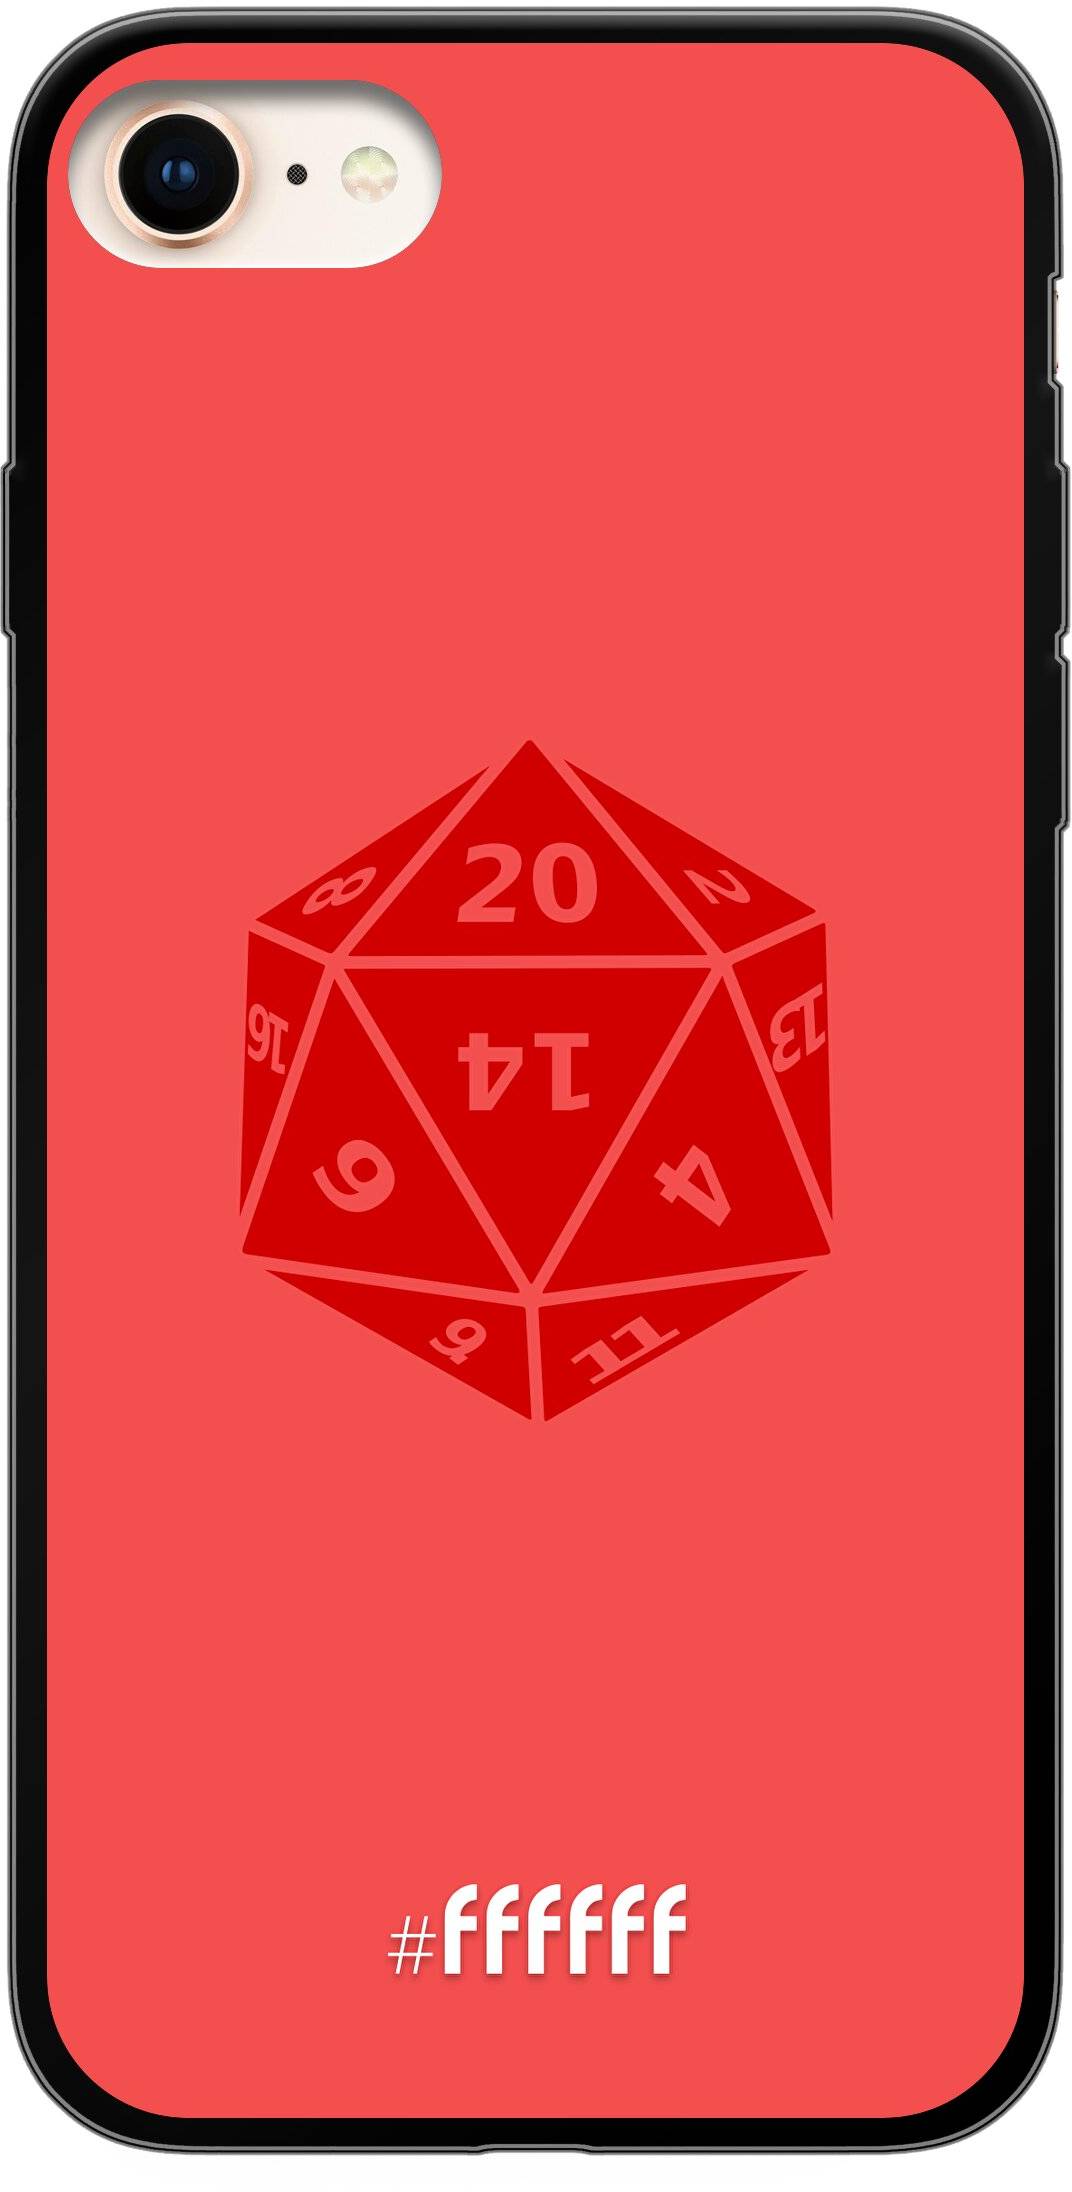 D20 - Red iPhone 7